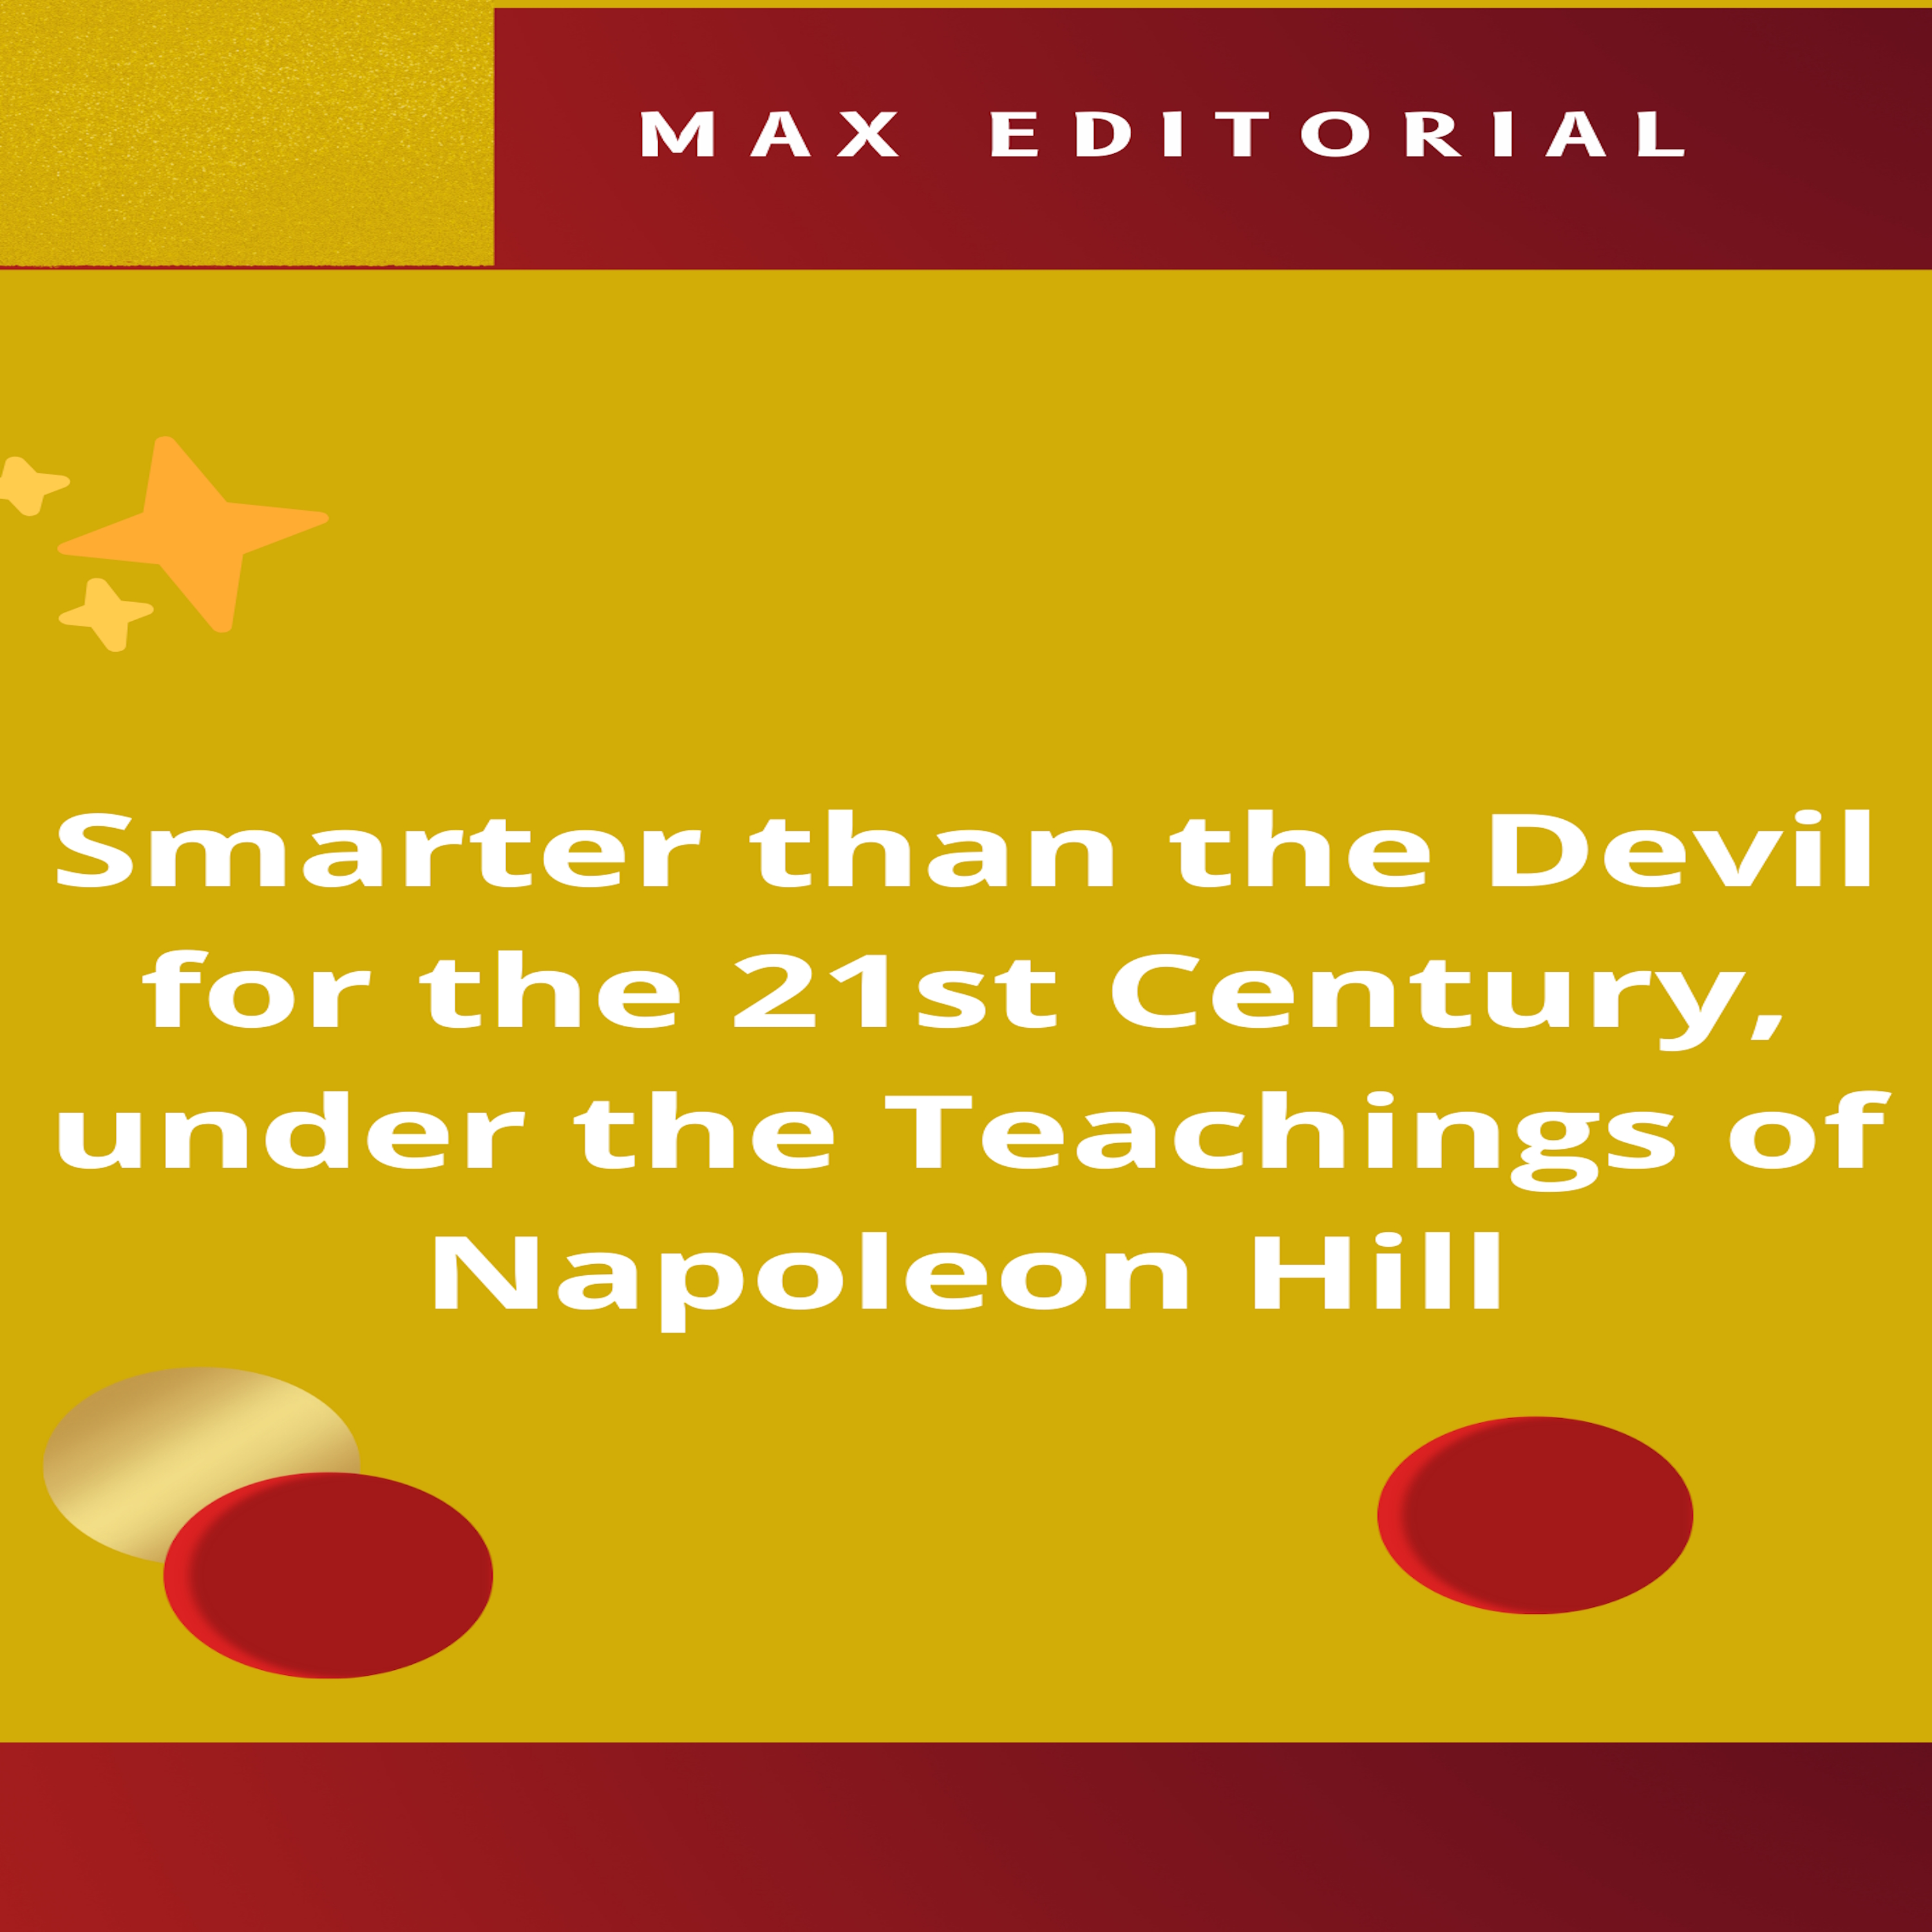 Smarter than the Devil for the 21st Century, under the Teachings of Napoleon Hill